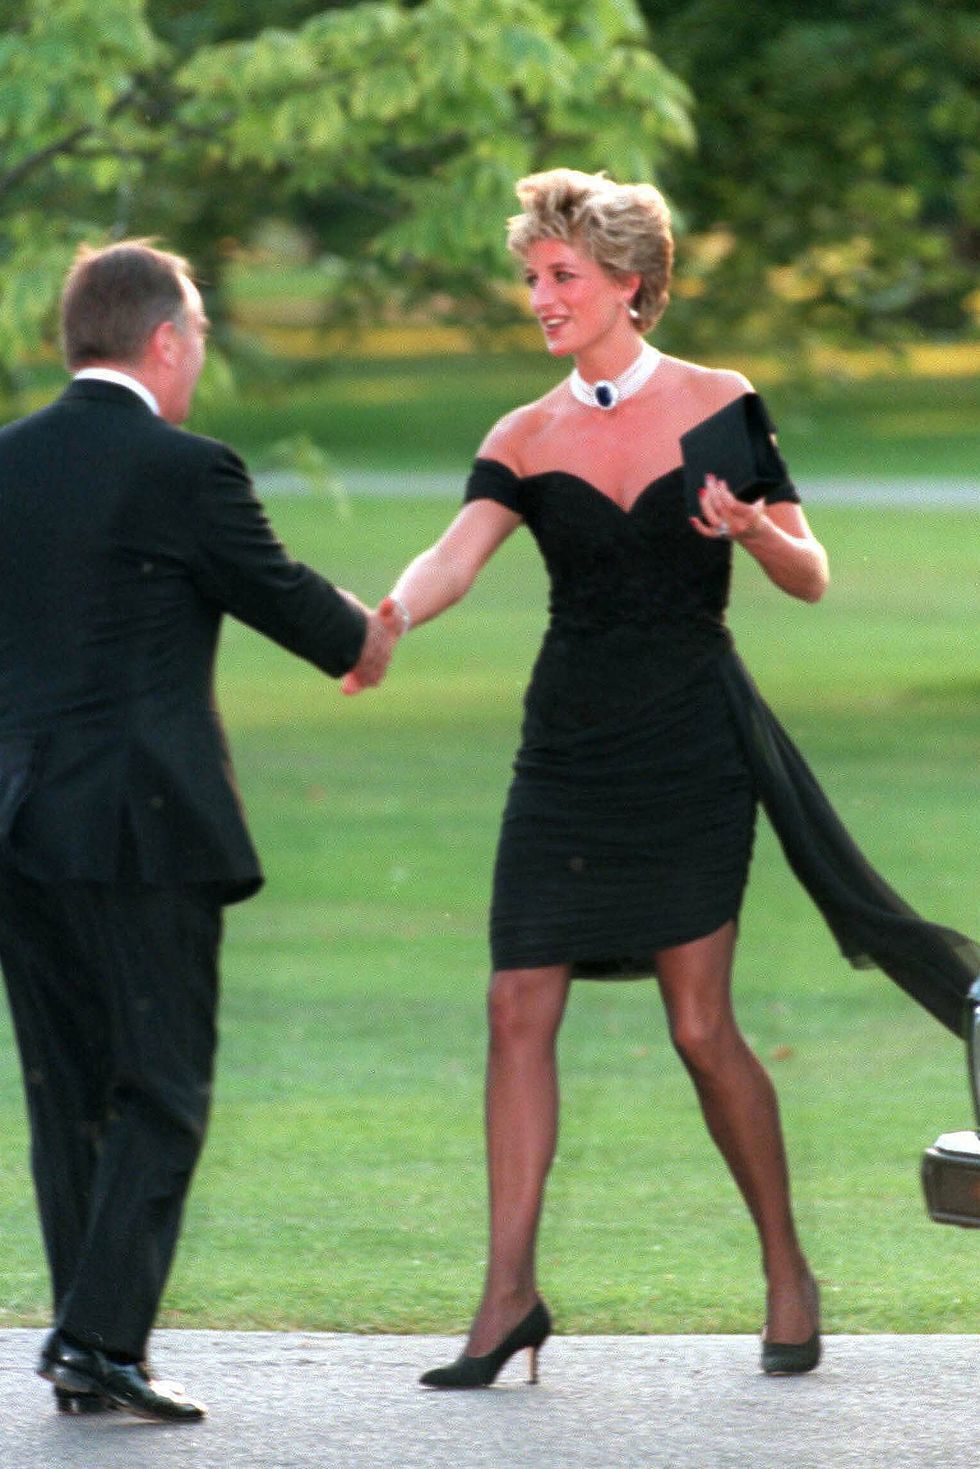 london, united kingdom november 20 diana, princess of wales, wearing a stunning black dress commissioned from christina stambolian, attends the vanity fair party at the serpentine gallery on november 20, 1994 in london, england the famous black revenge dress was a spectacular coup by the princess, worn on the very evening that prince charles made his notorious adultery admission on television photo by anwar husseinwireimage